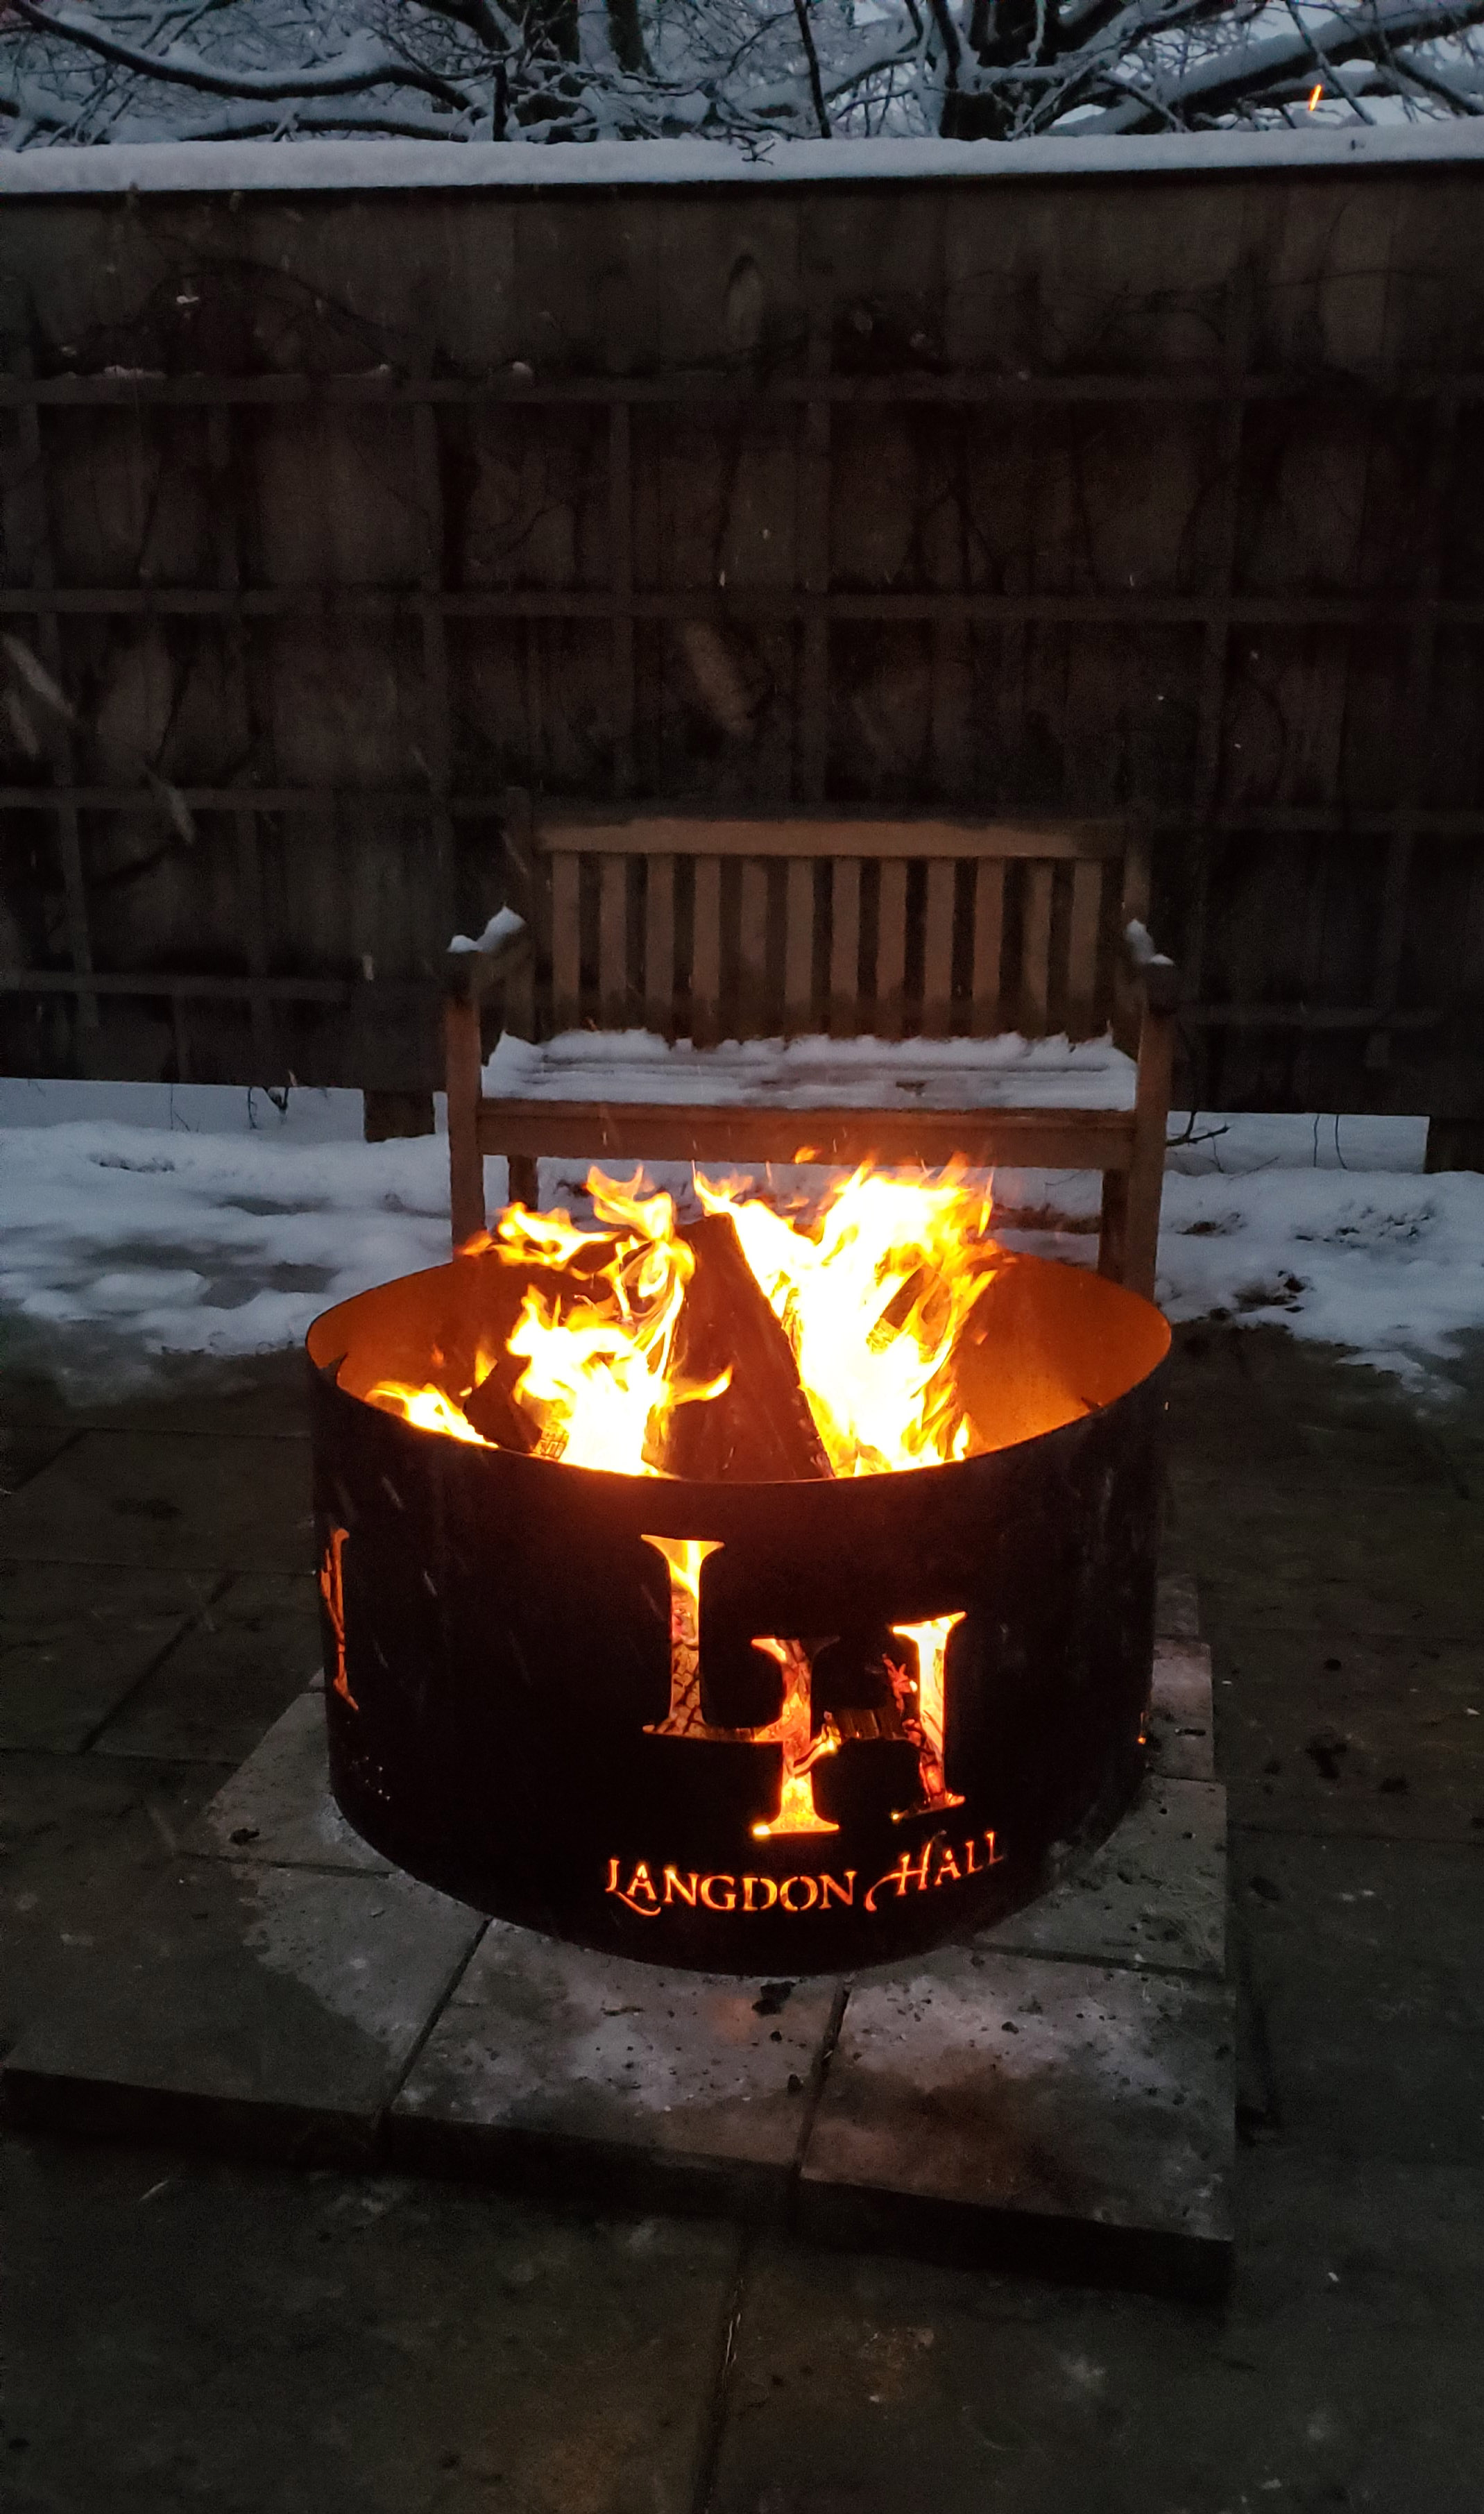 Fire Pits Are This Winter S Hottest, Are Propane Fire Pits Legal In Ontario County Ny